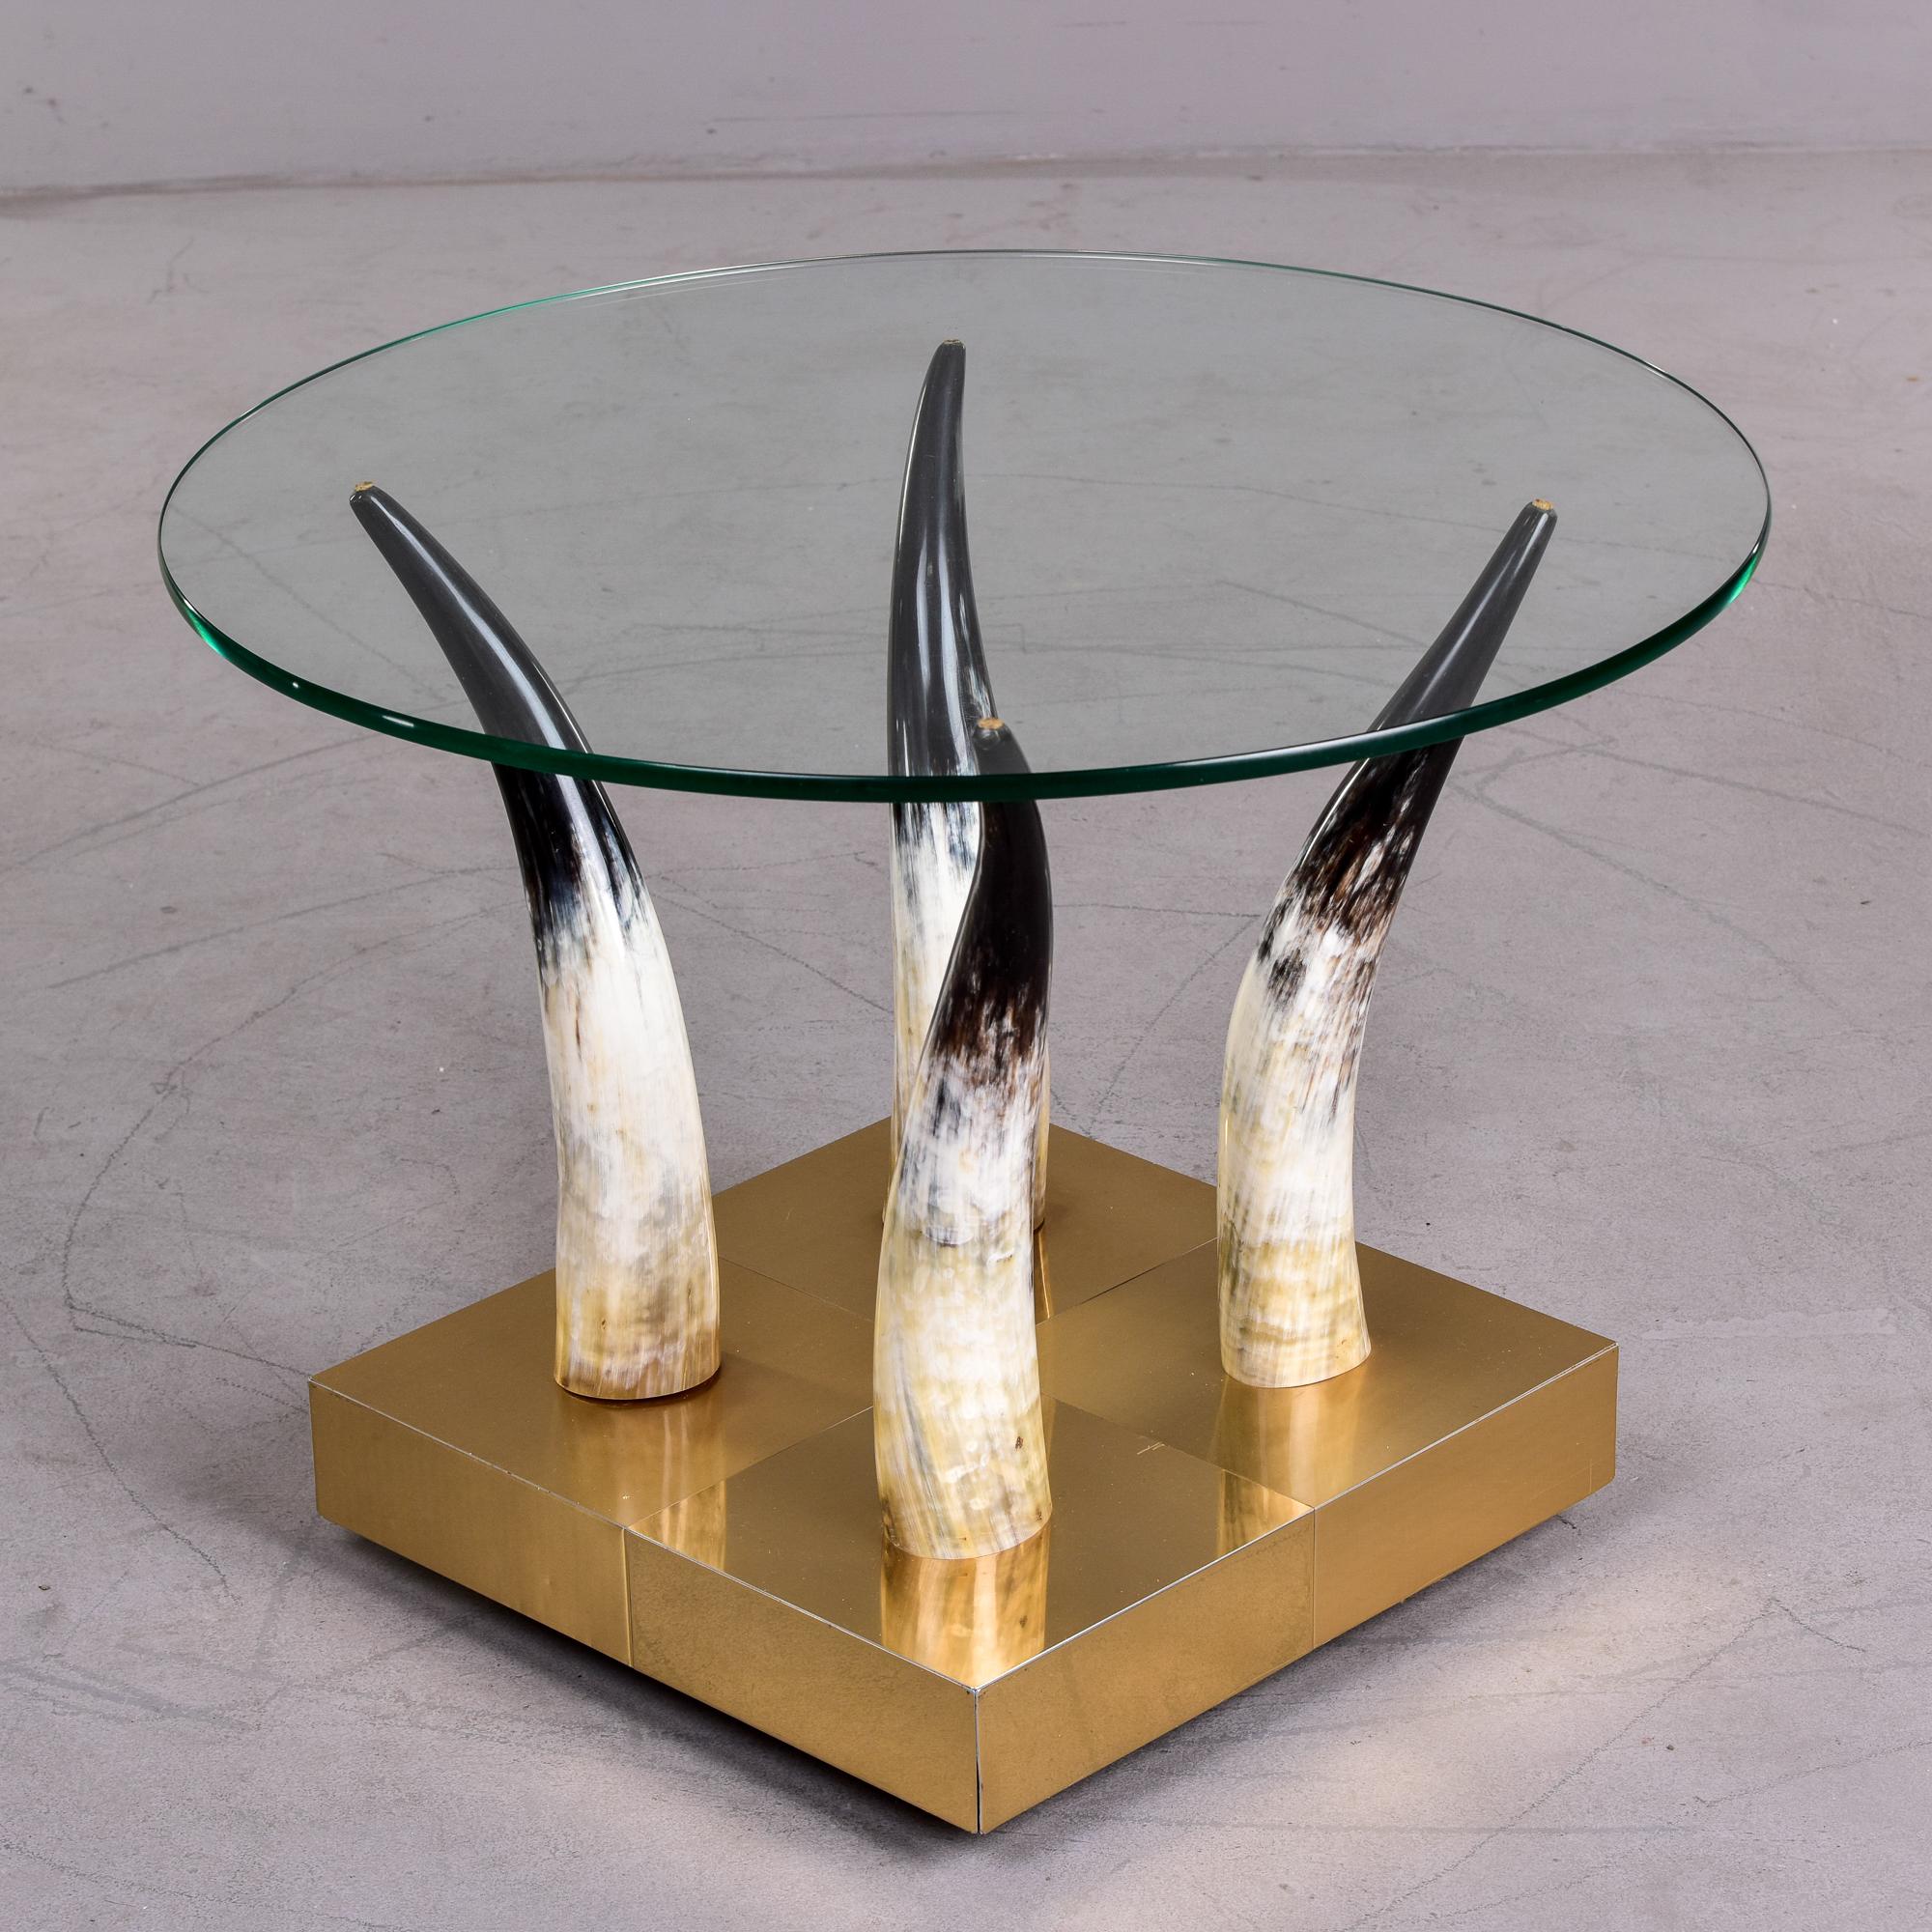 Circa 1970s side table has a brass covered base with casters and steer horns that support a clear glass table top. Unknown maker. Very good vintage condition with minor scattered surface wear.